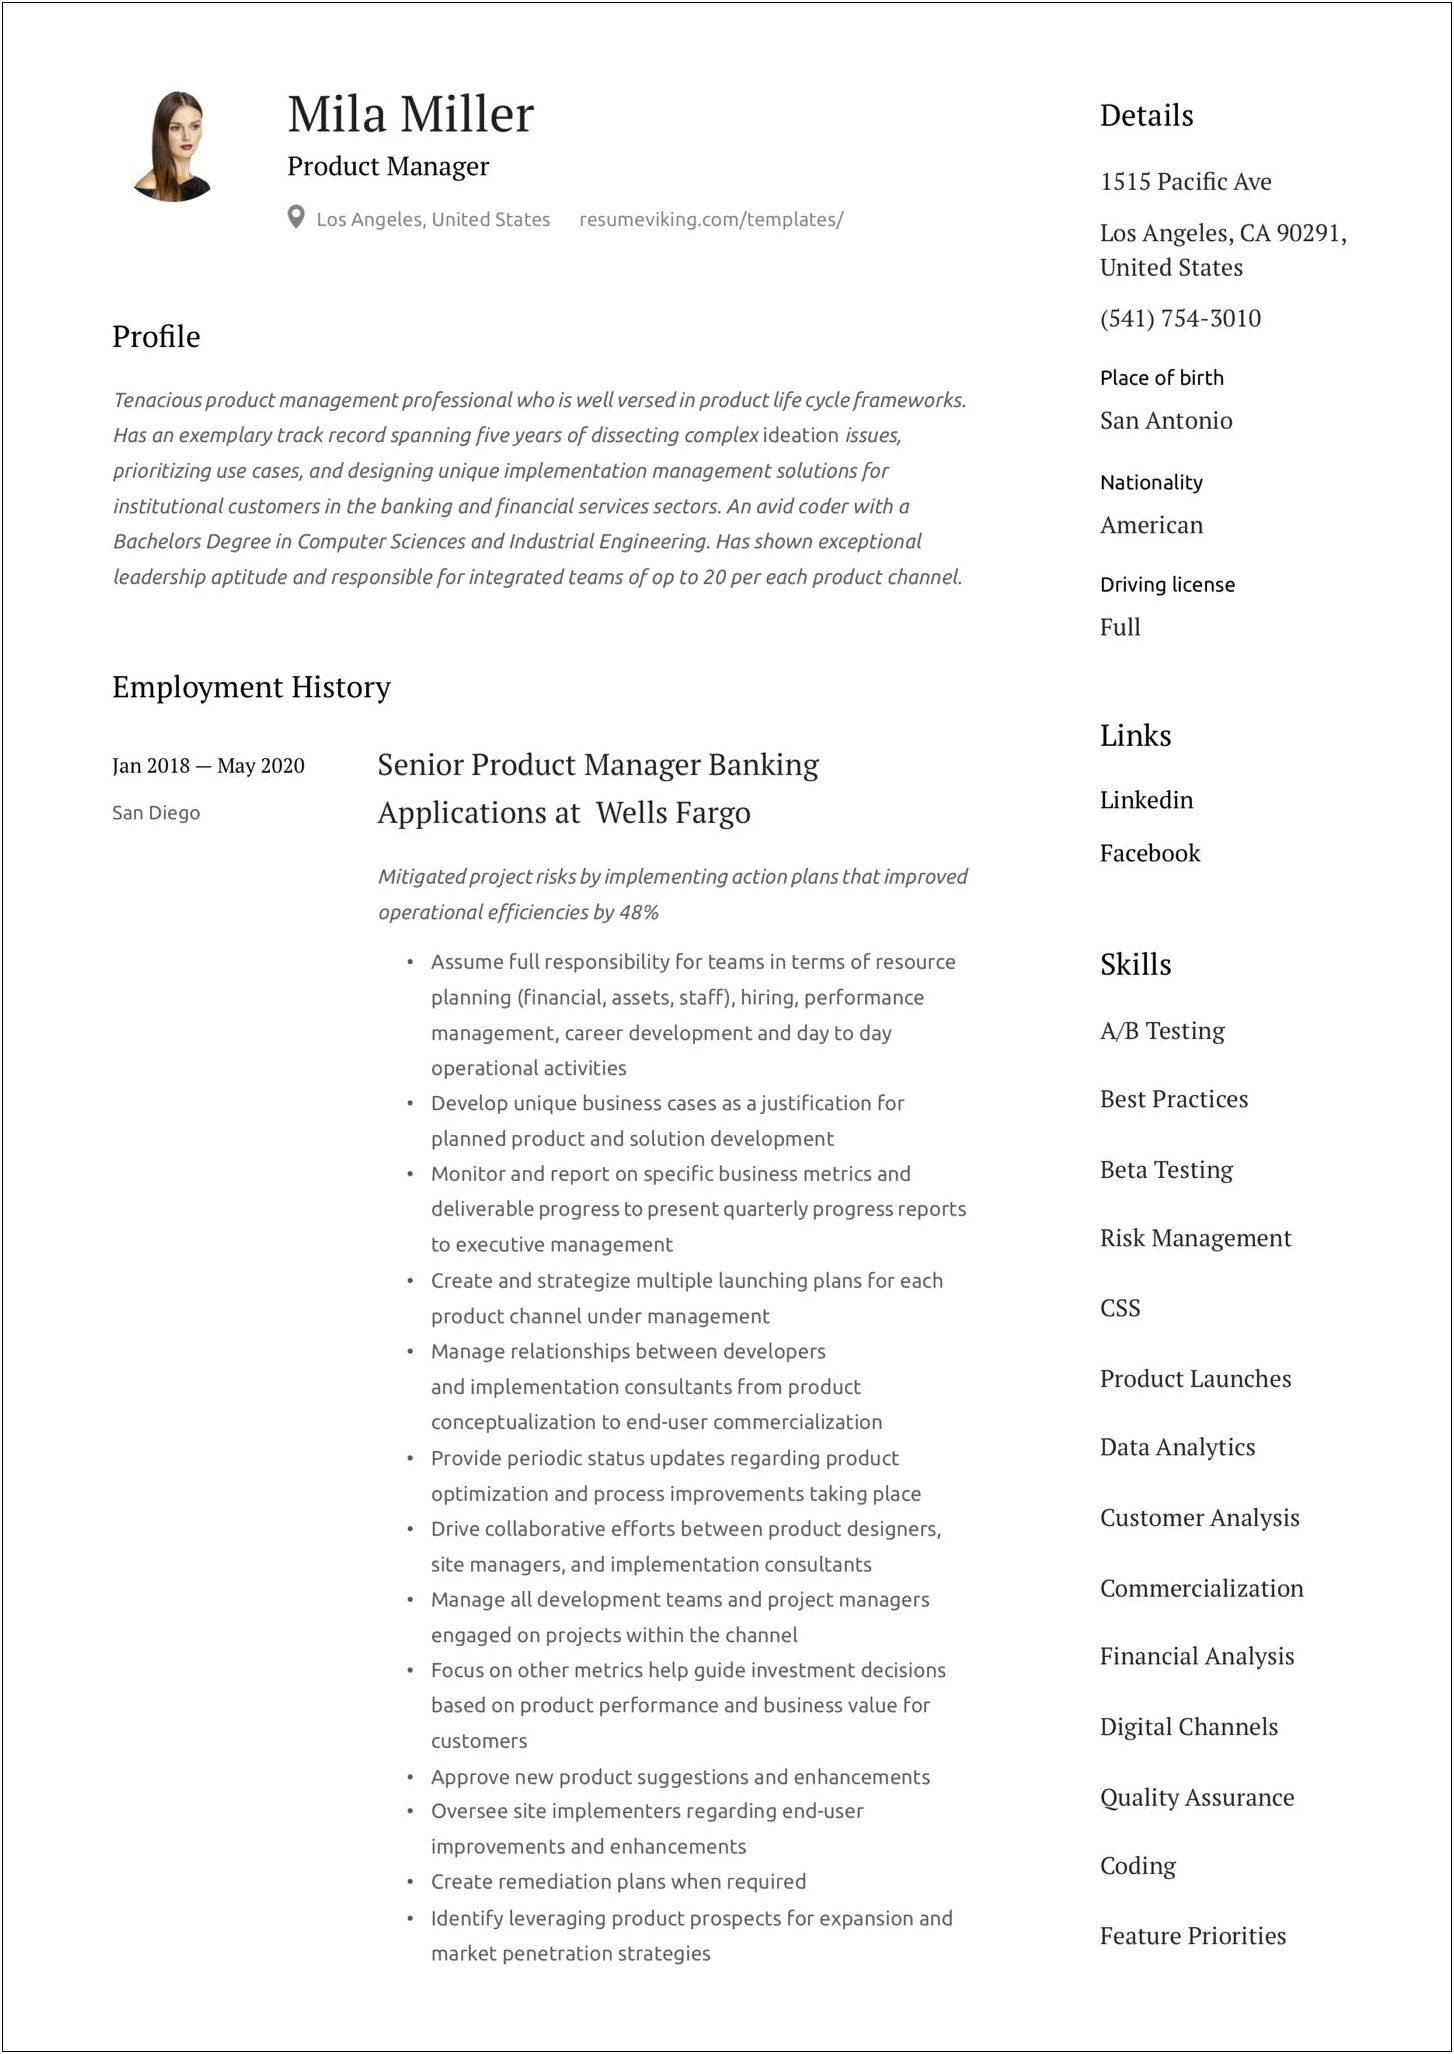 A B Testing Resume Example